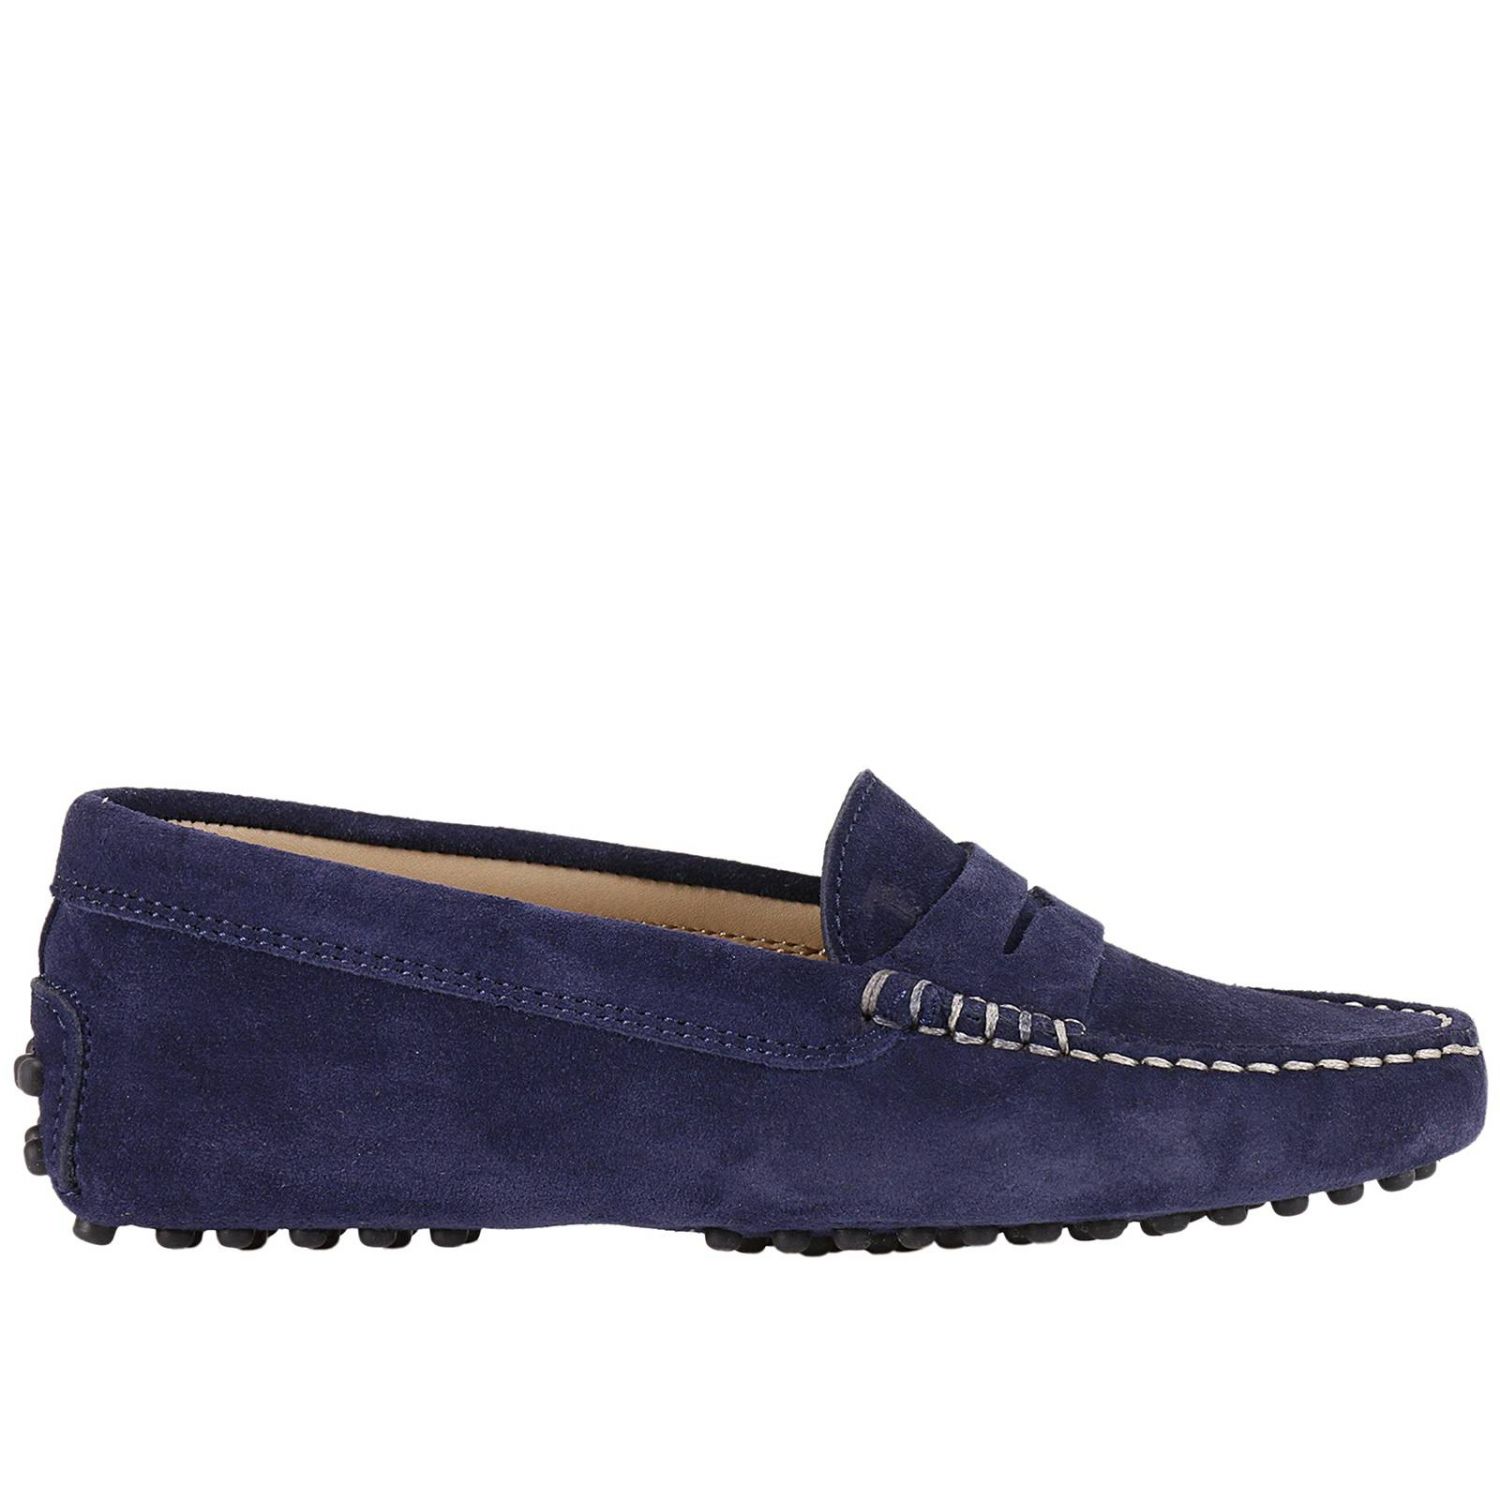 TODS: Shoes kids Tod's | Shoes Tods Kids Blue | Shoes Tods UXC00G00010 ...